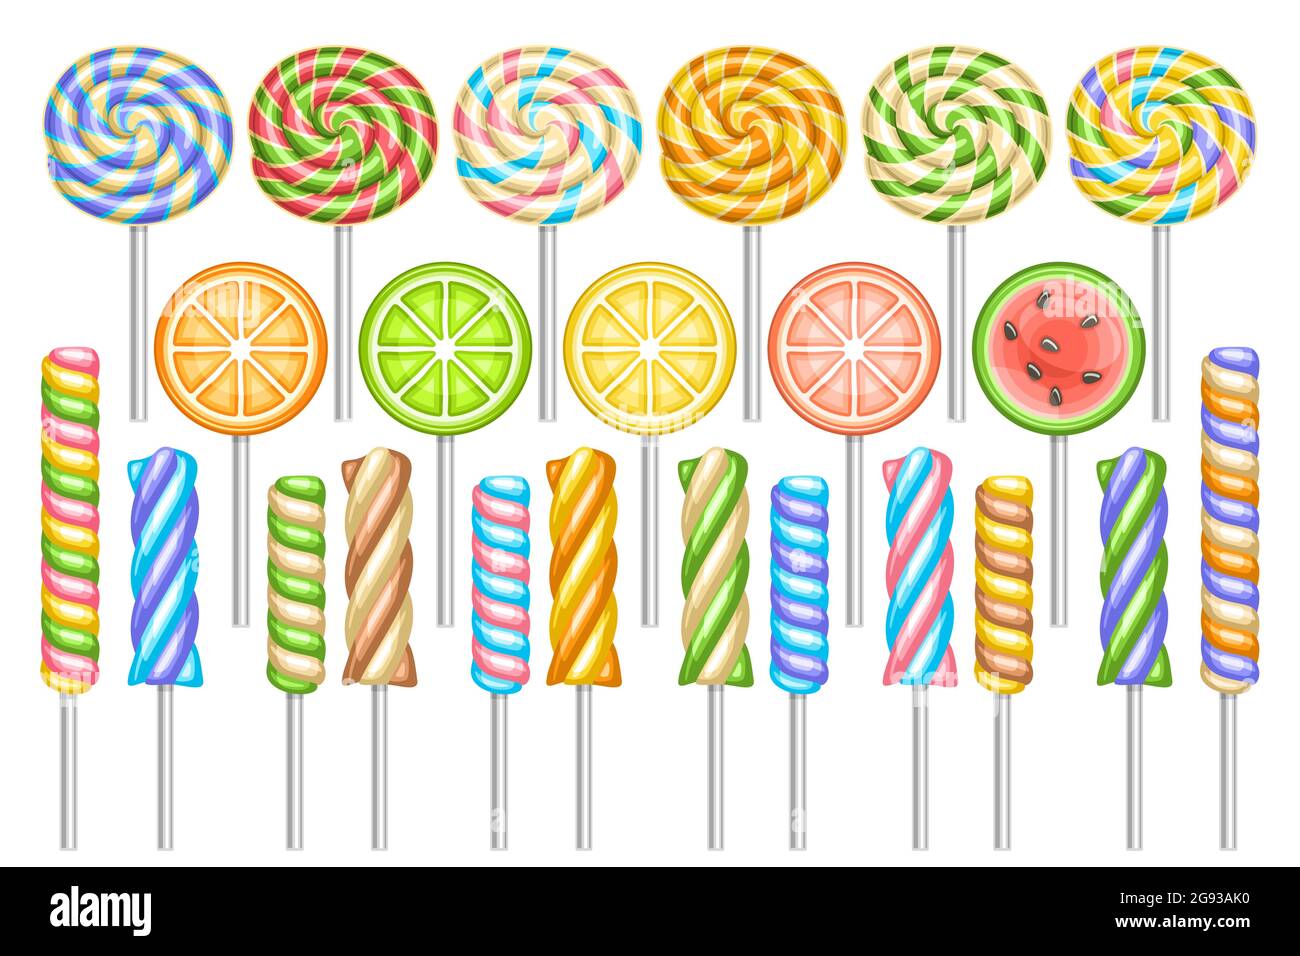 Vector set of Lollipops, lot collection of 23 cut out illustrations of different curly and swirly tasty lollipops on sticks, group of many isolated fr Stock Vector